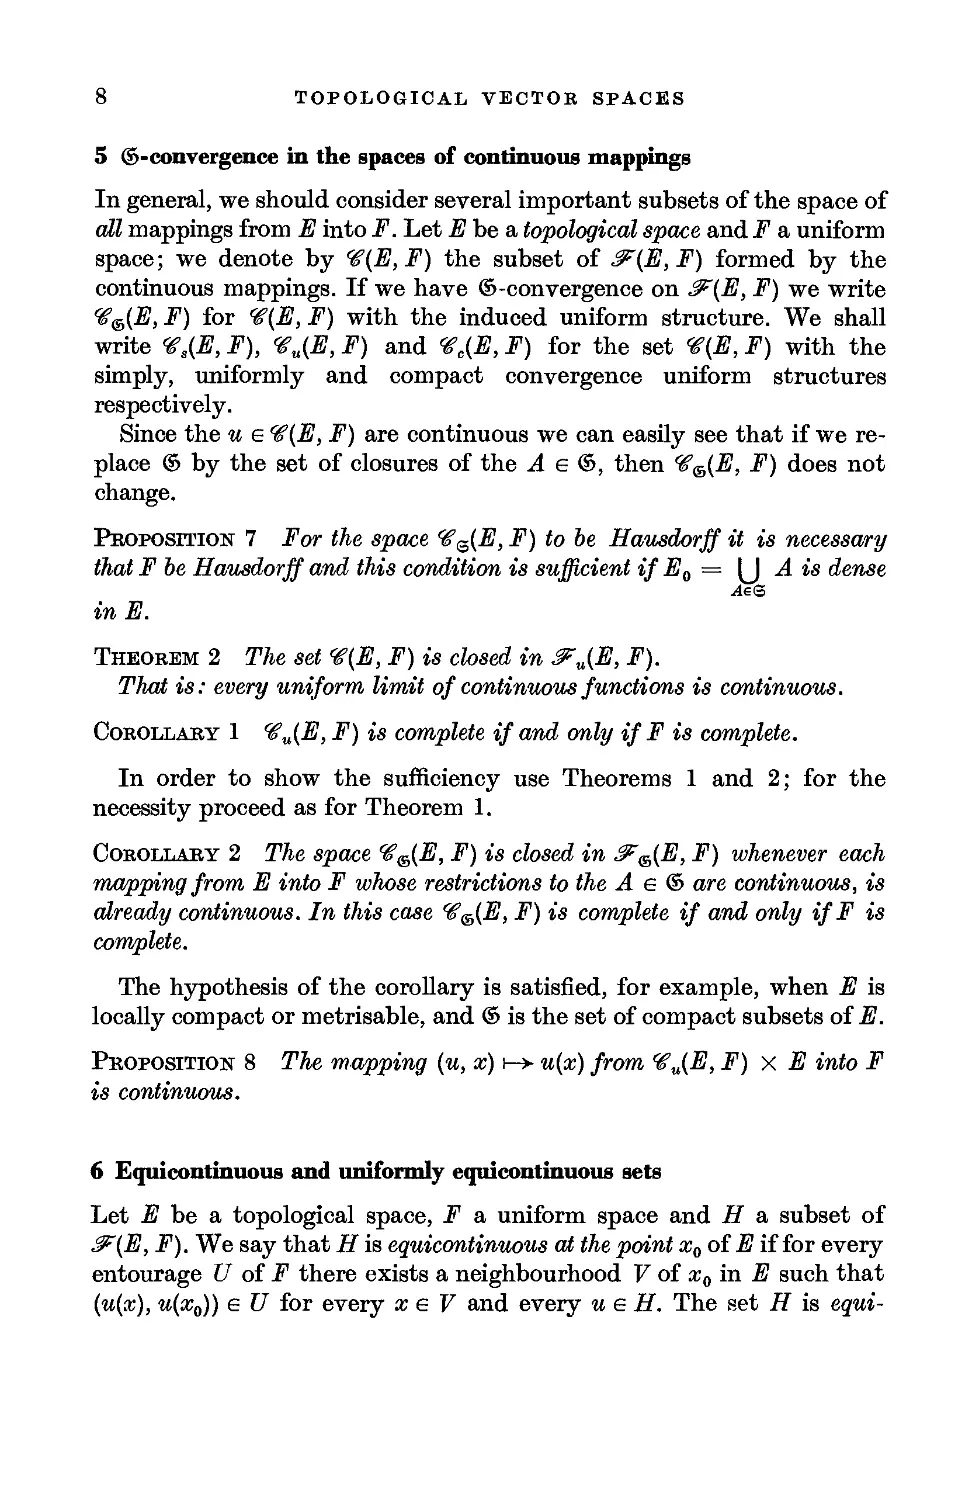 5. S-Convergence in the spaces of continuous mappings
6. Equicontinuous and uniformly equicontinuous sets